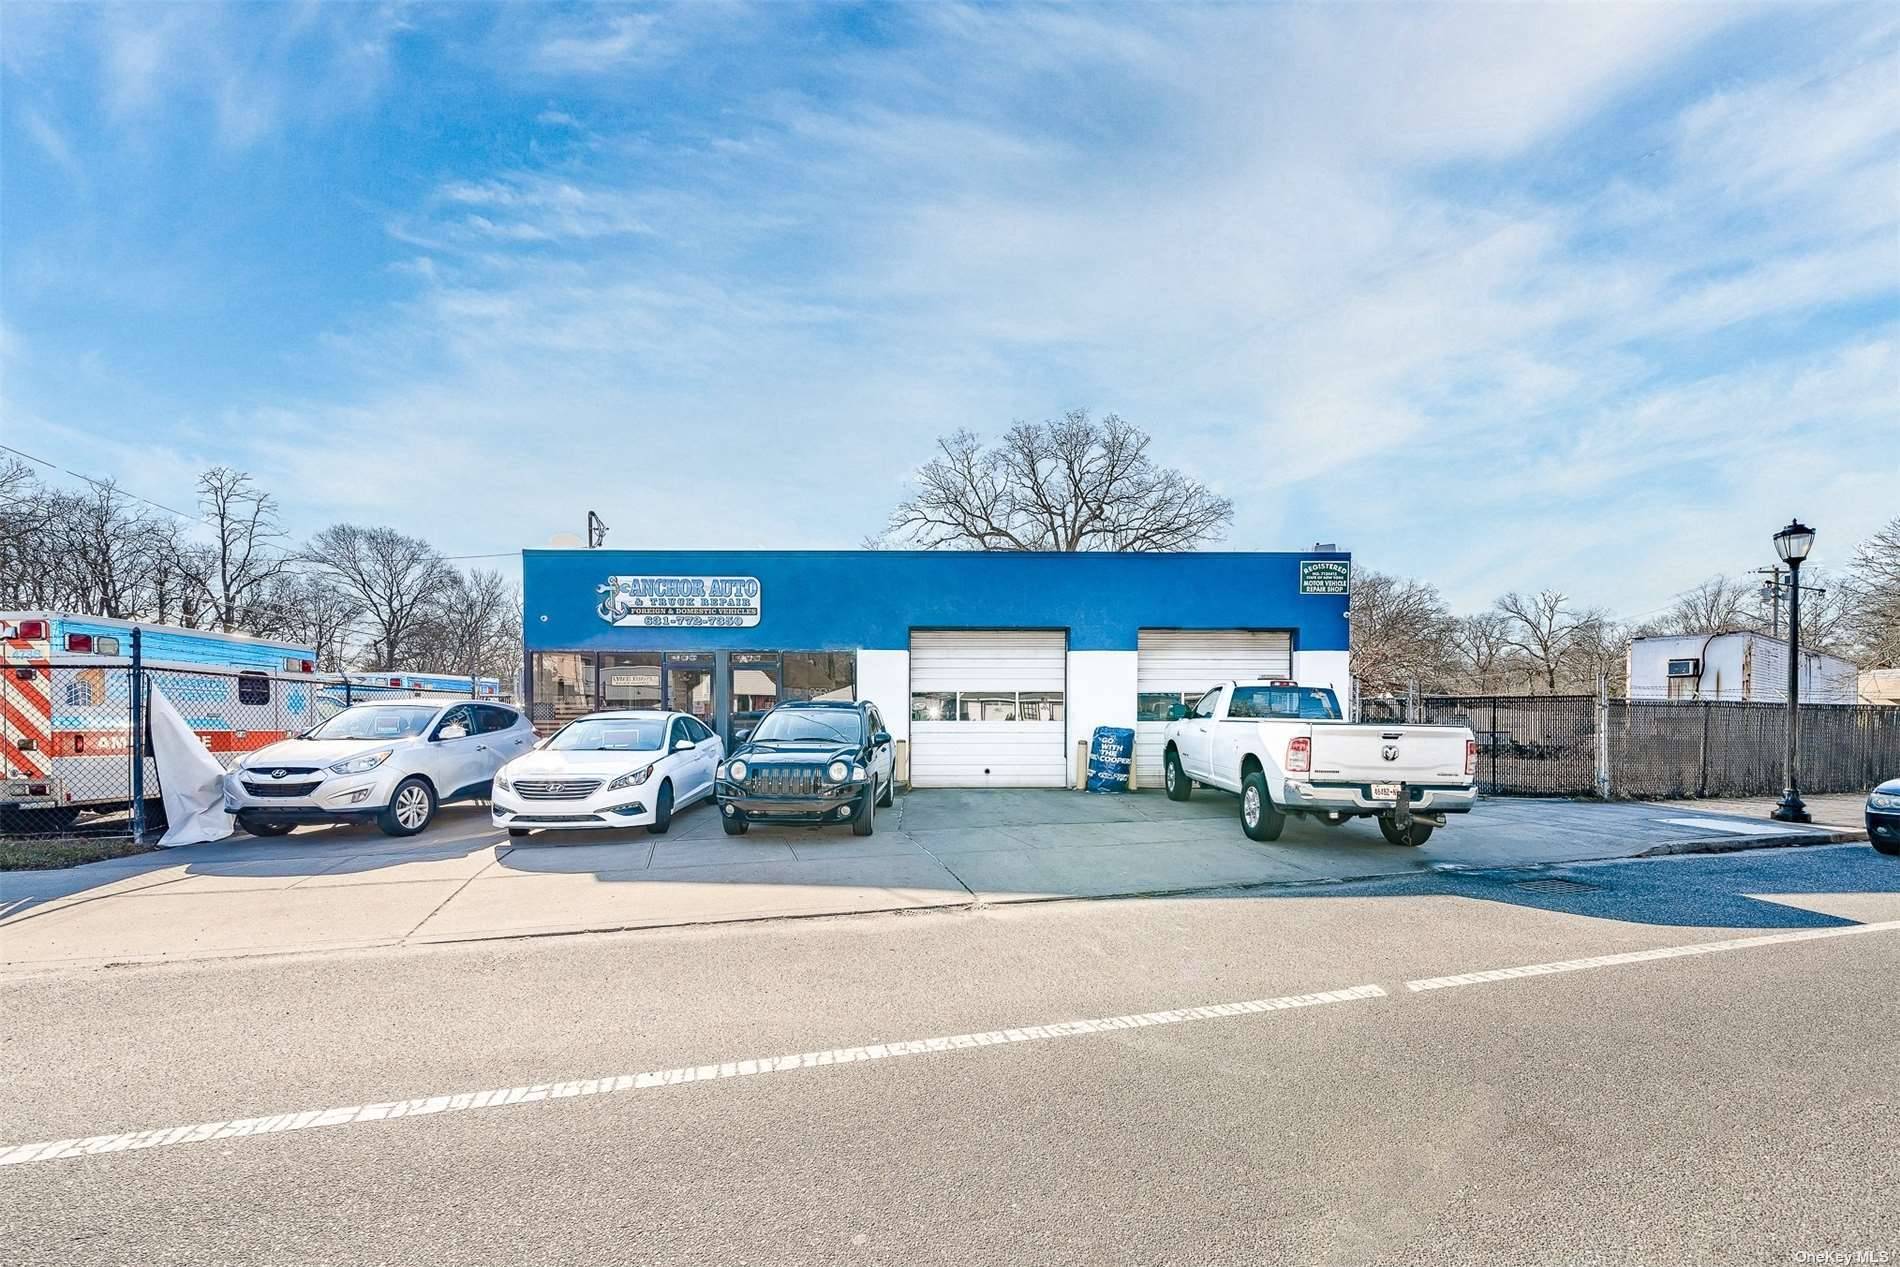 Great location large Autobody Auto Repair Shop with large fenced Yard.